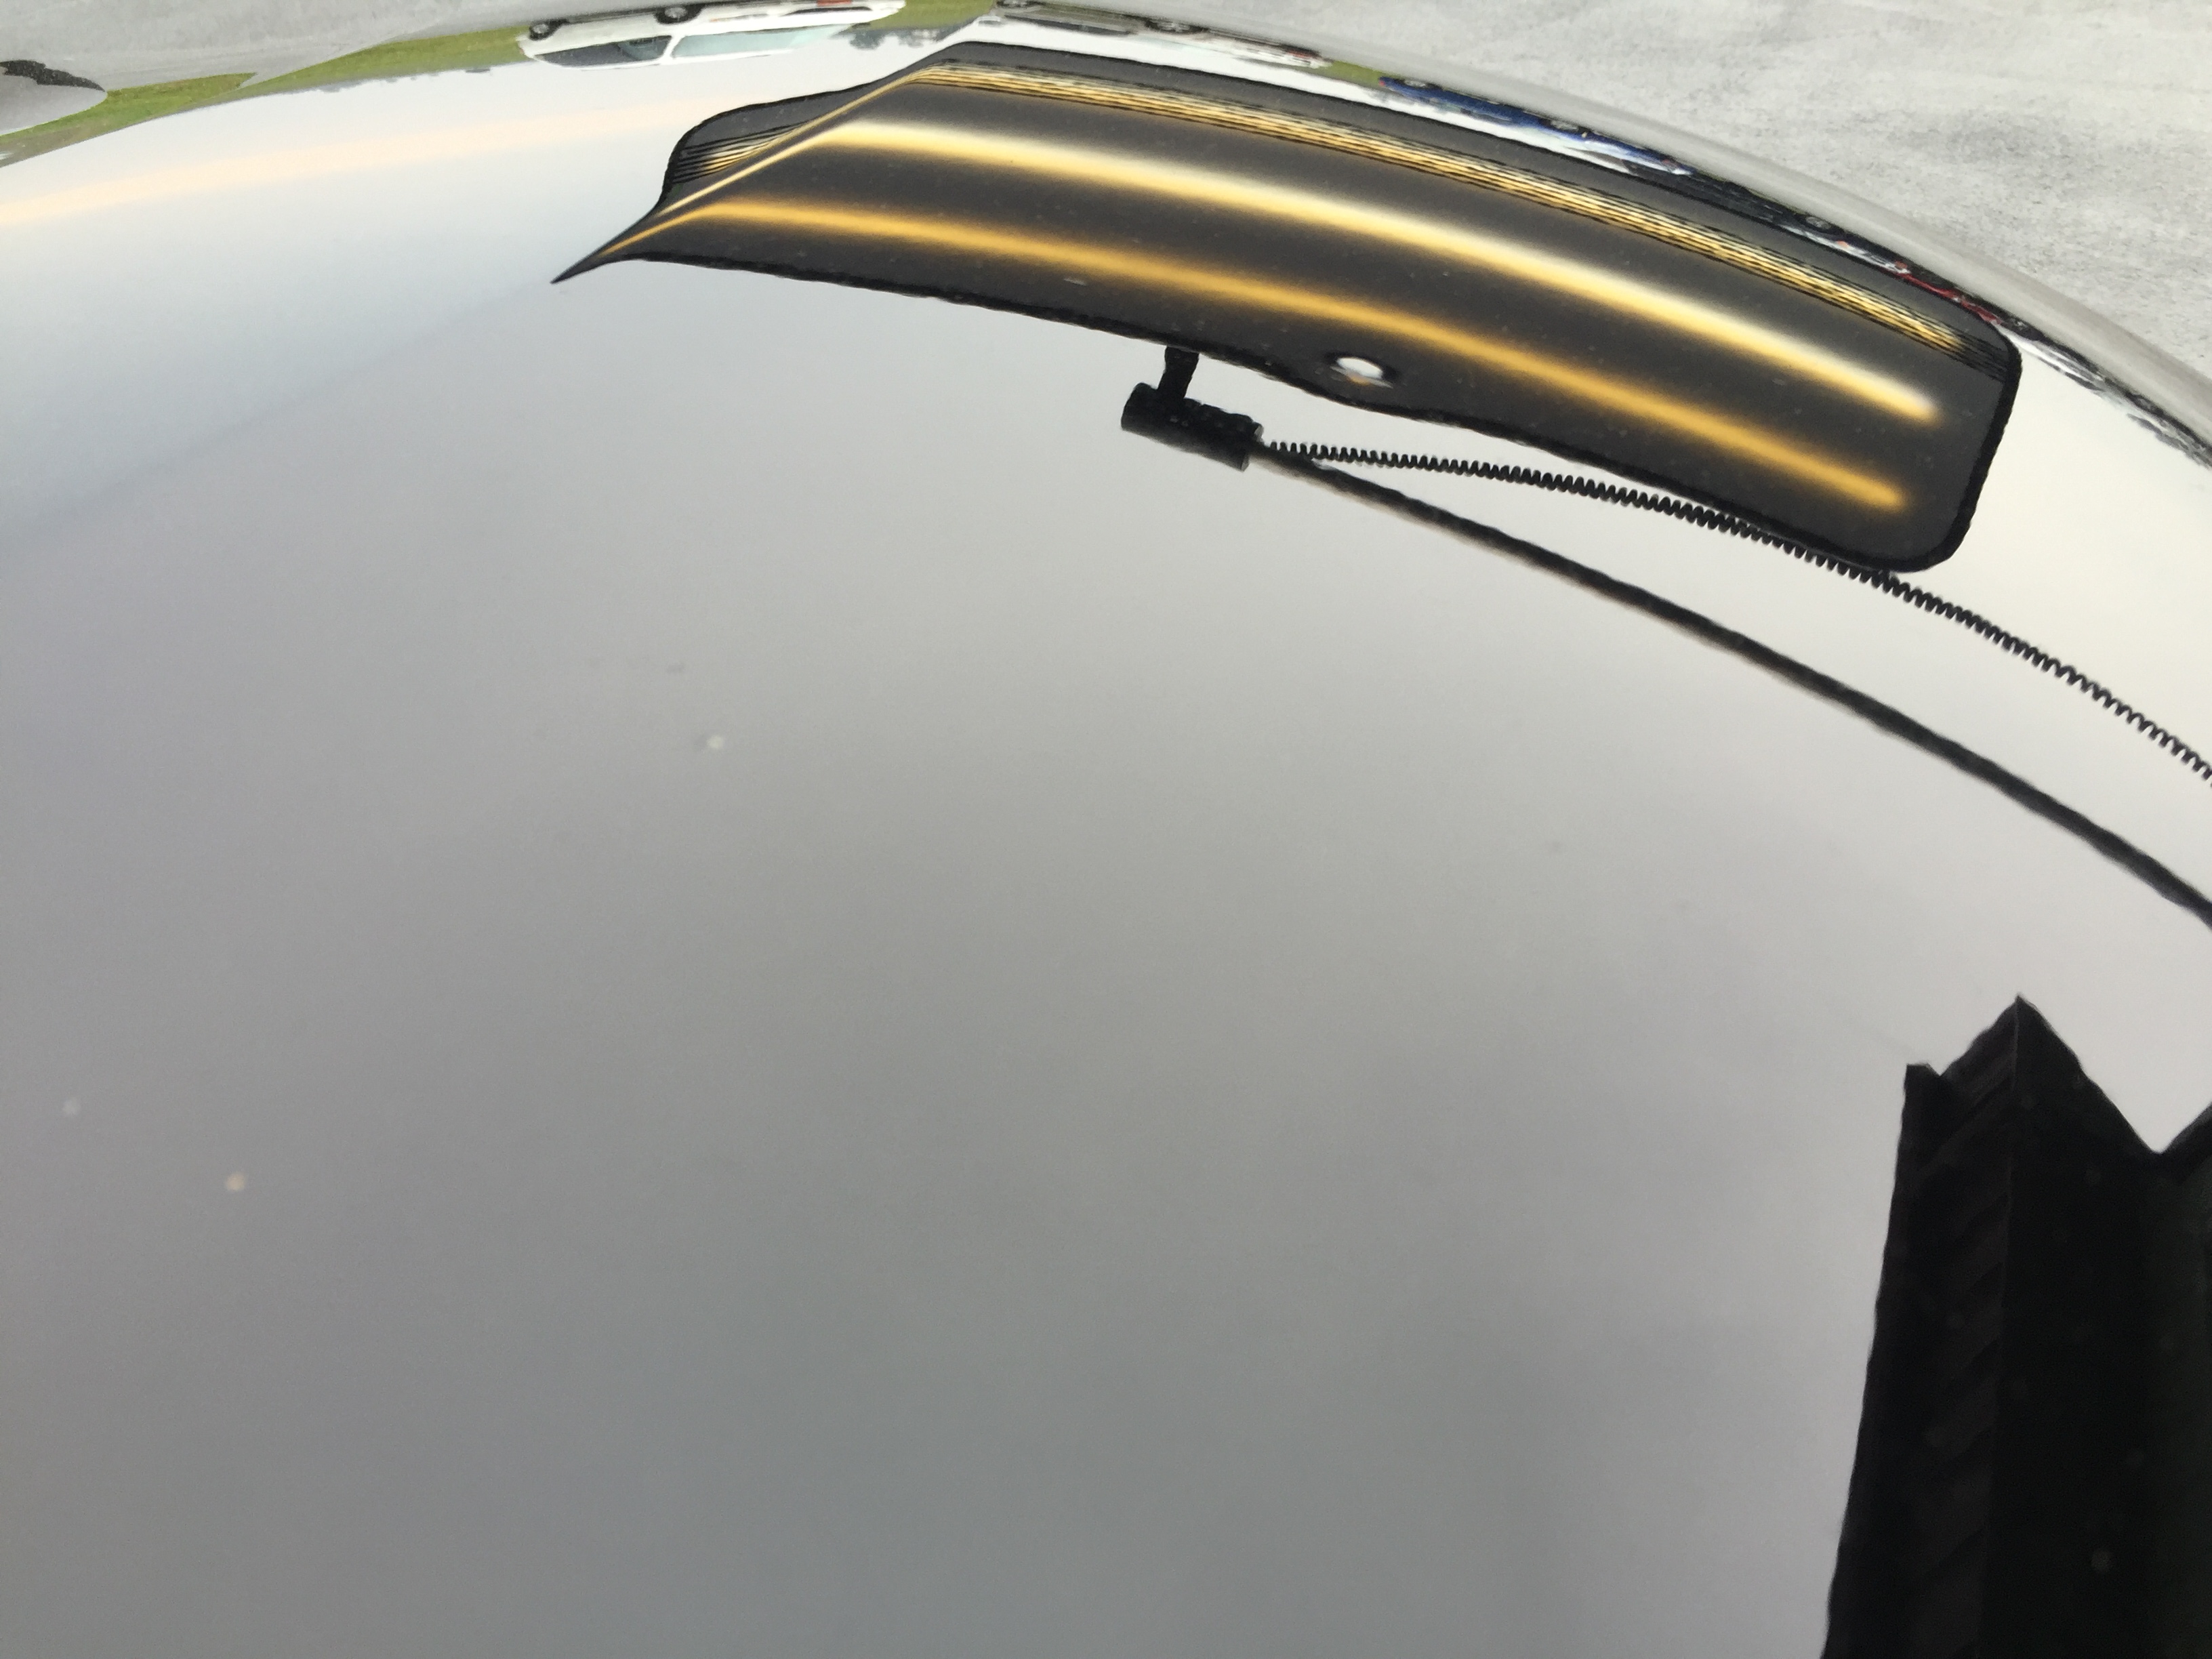 2012 Black Veloster hood dent. Work was done by Michael Bocek from 217dent.com. Go to http://217dent.com an estimate, or for more information about paintless dent removal.